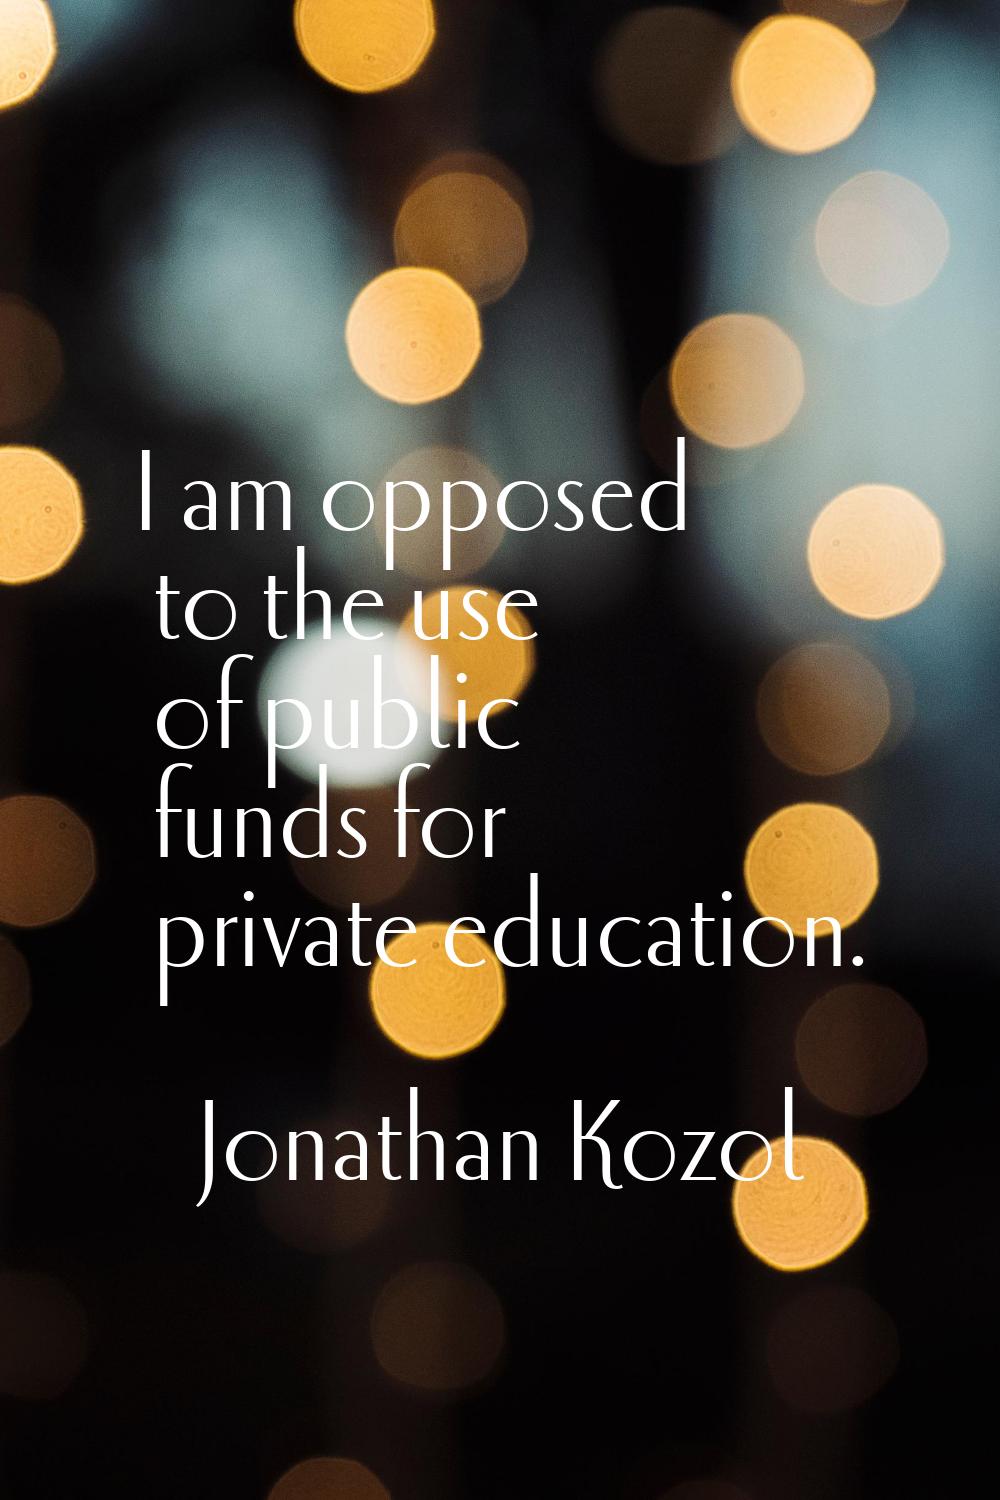 I am opposed to the use of public funds for private education.